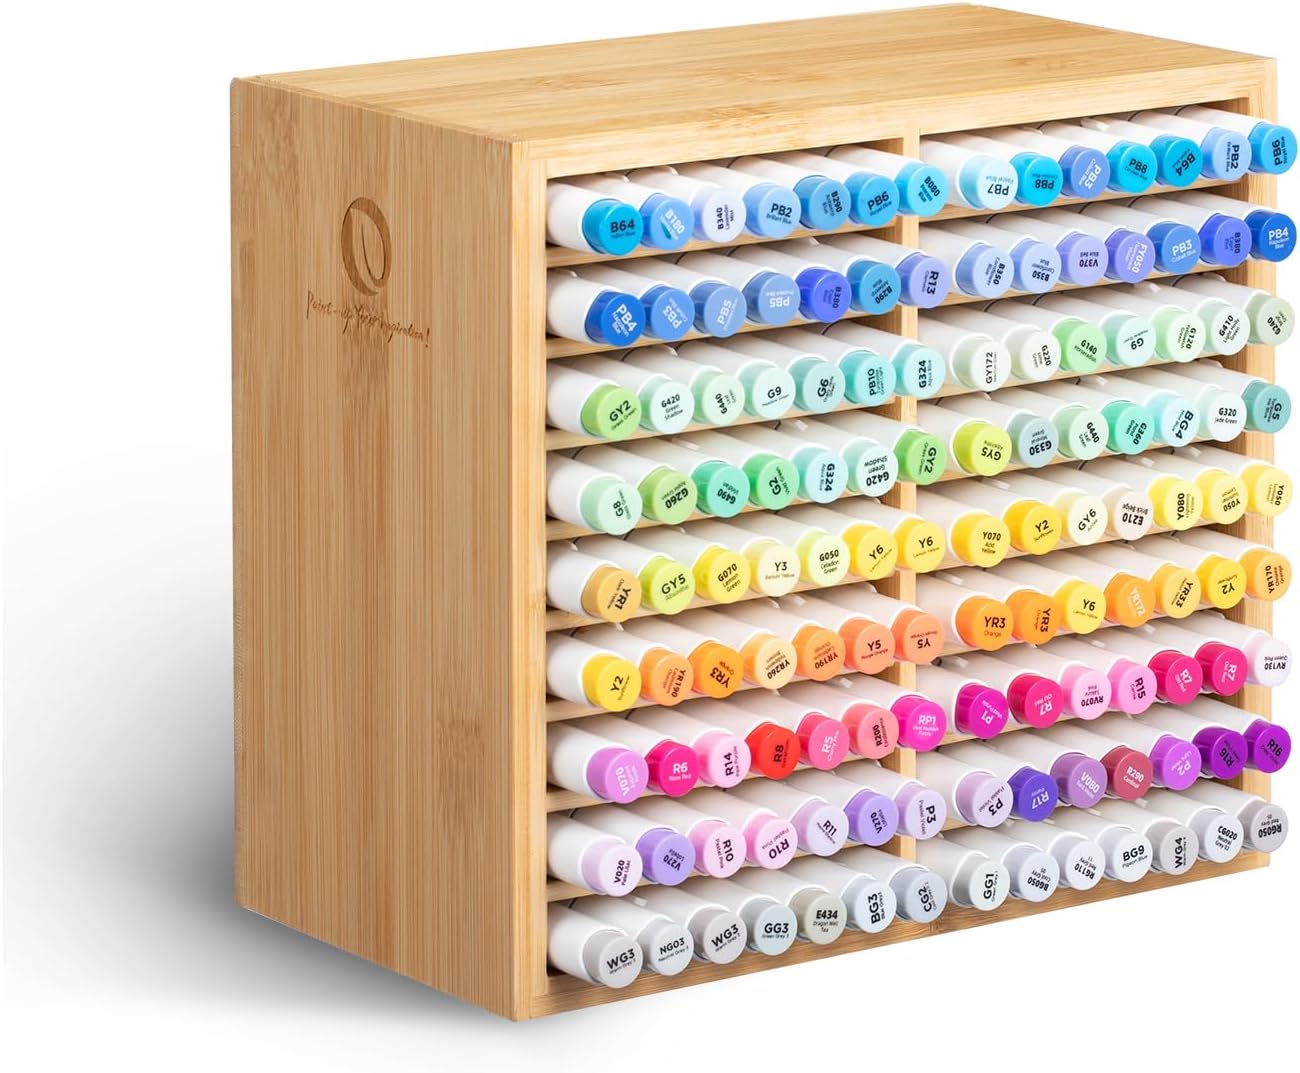 Ohuhu Bamboo Marker Organizer, Wooden Desktop Storage Hold 126 Markers, Markers Pens Pencils Art Brushes Stationary Organizer Pencil Holder with 18 Compartments for Home Classroom Office Decor